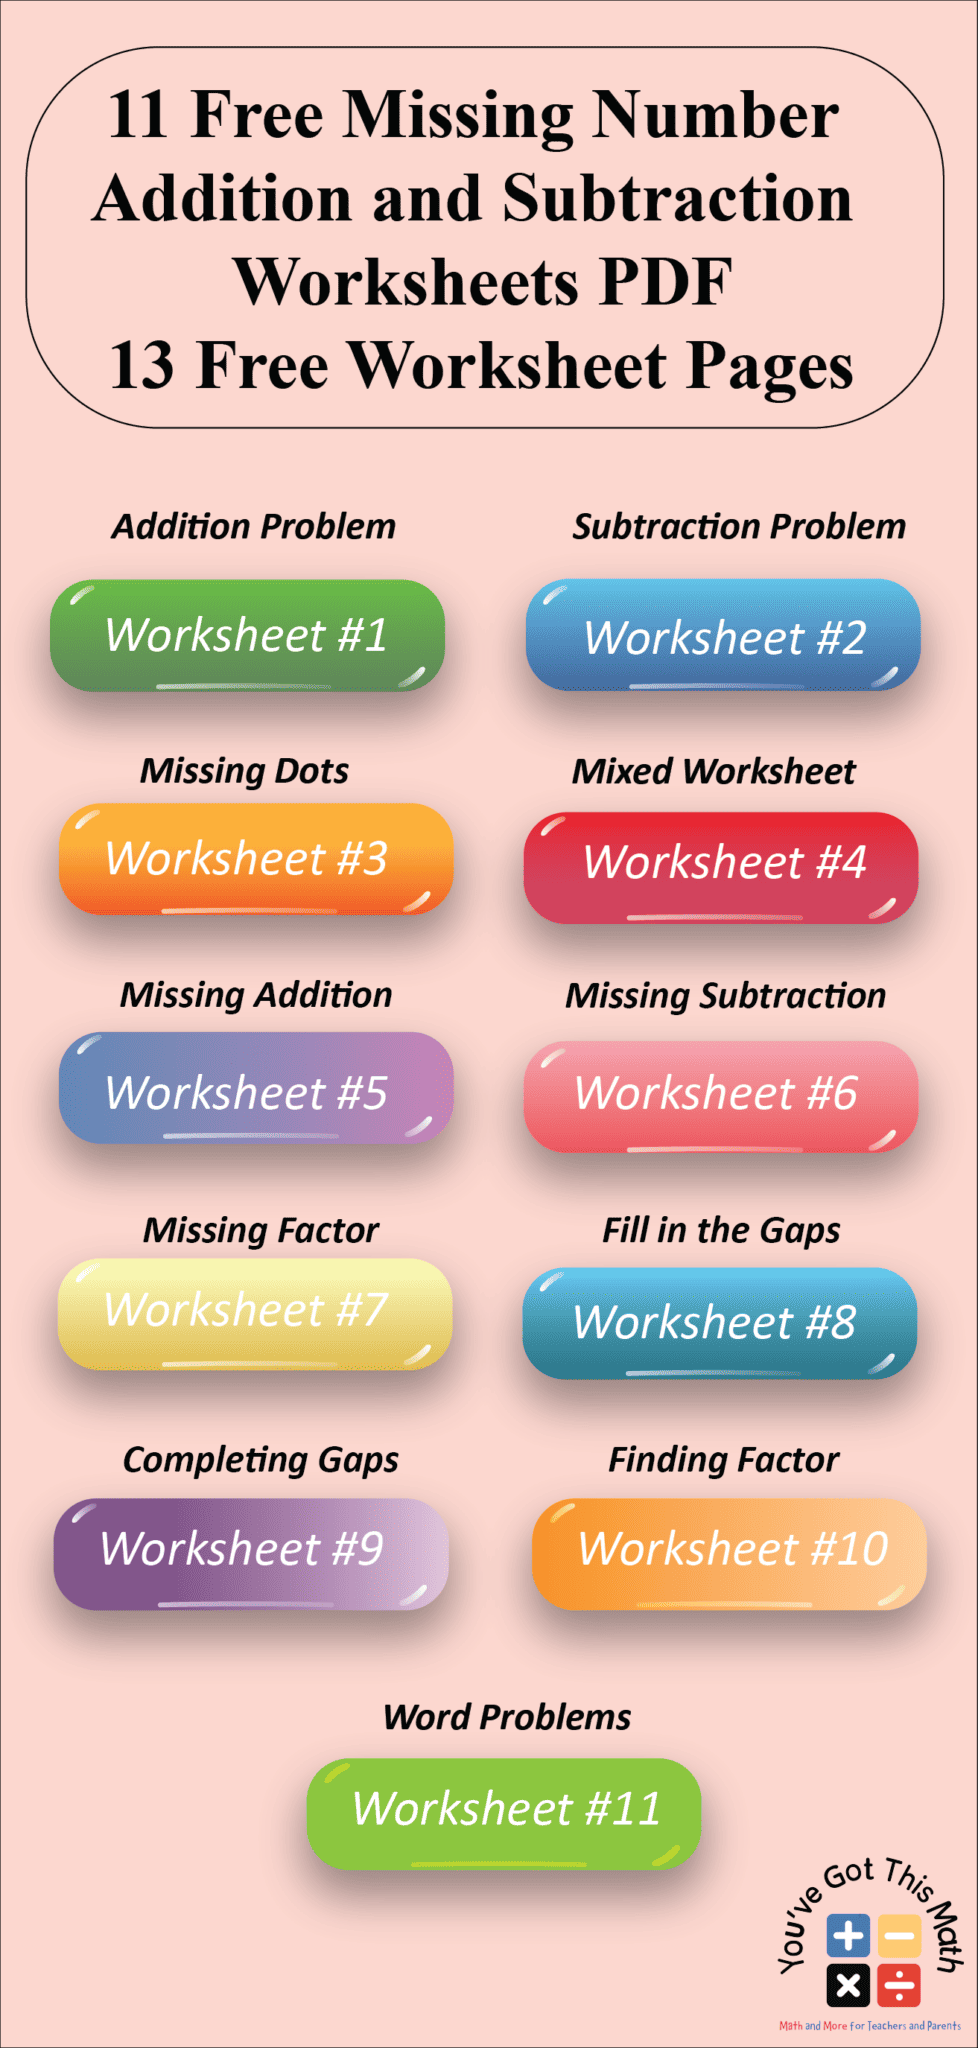 11-free-find-missing-number-addition-and-subtraction-worksheets-pdf